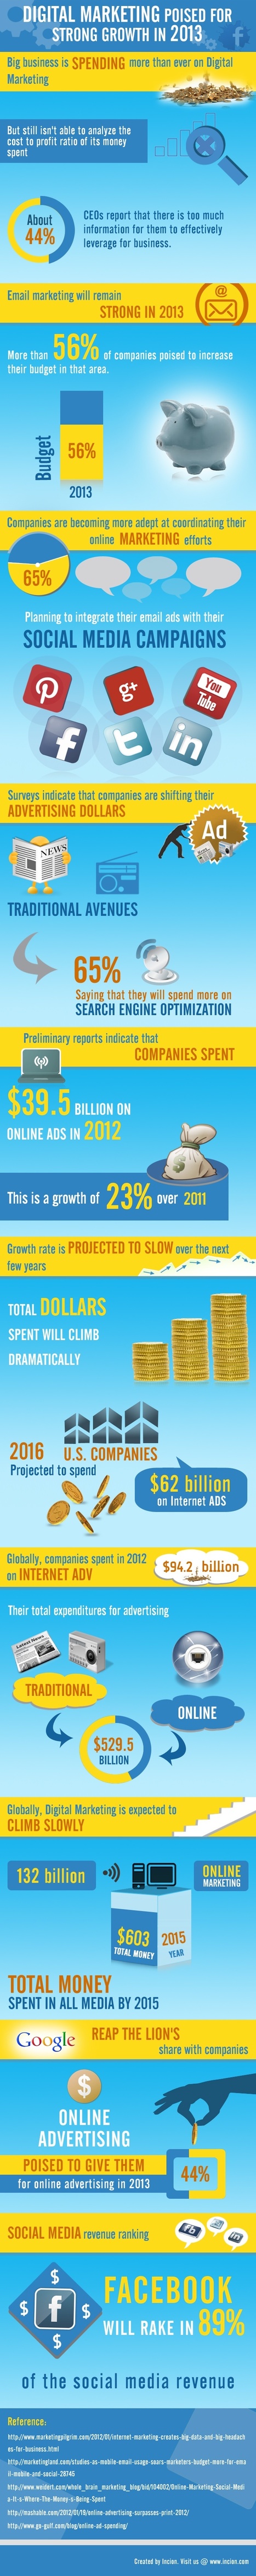 Growth of digital marketing in 2013 [Infographic] | Information Technology & Social Media News | Scoop.it